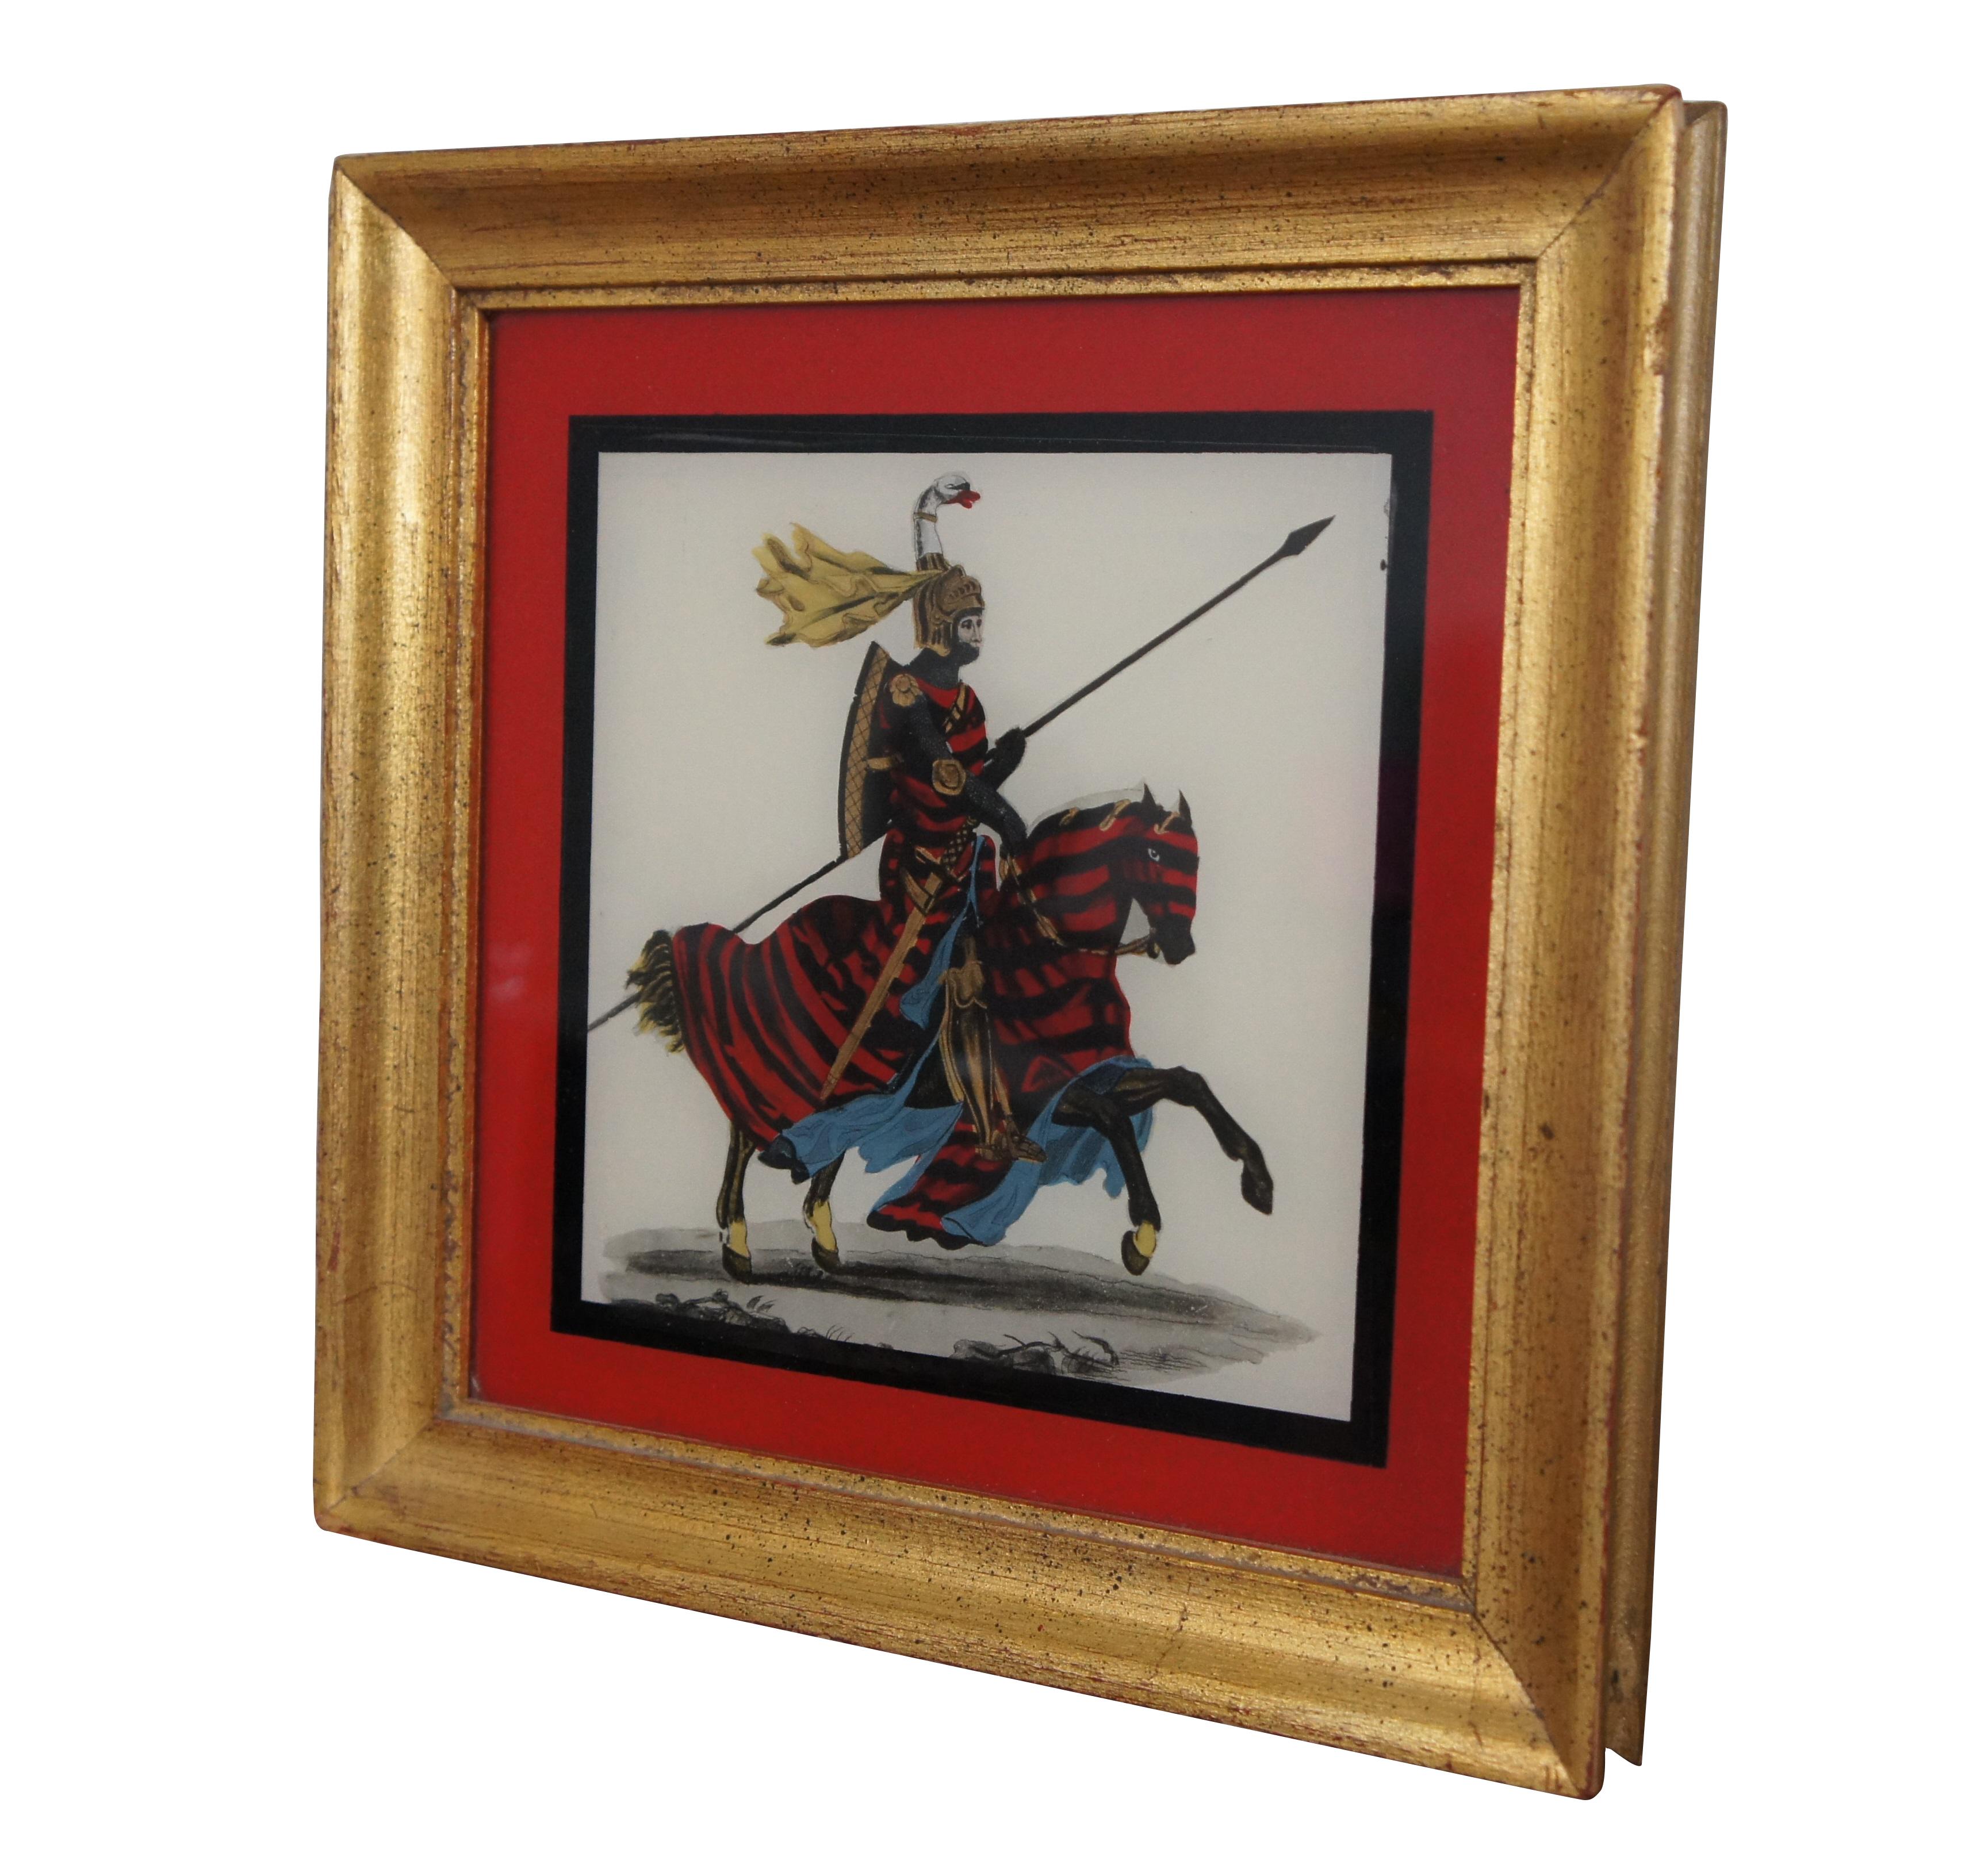 Vintage Medieval Knight reverse painting on glass, featuring a jousting horseback Alymer de Valence, second Earl of Pembroke 1275-1324, Franco Welsh nobleman.  s59-470 

Dimensions:
9.5